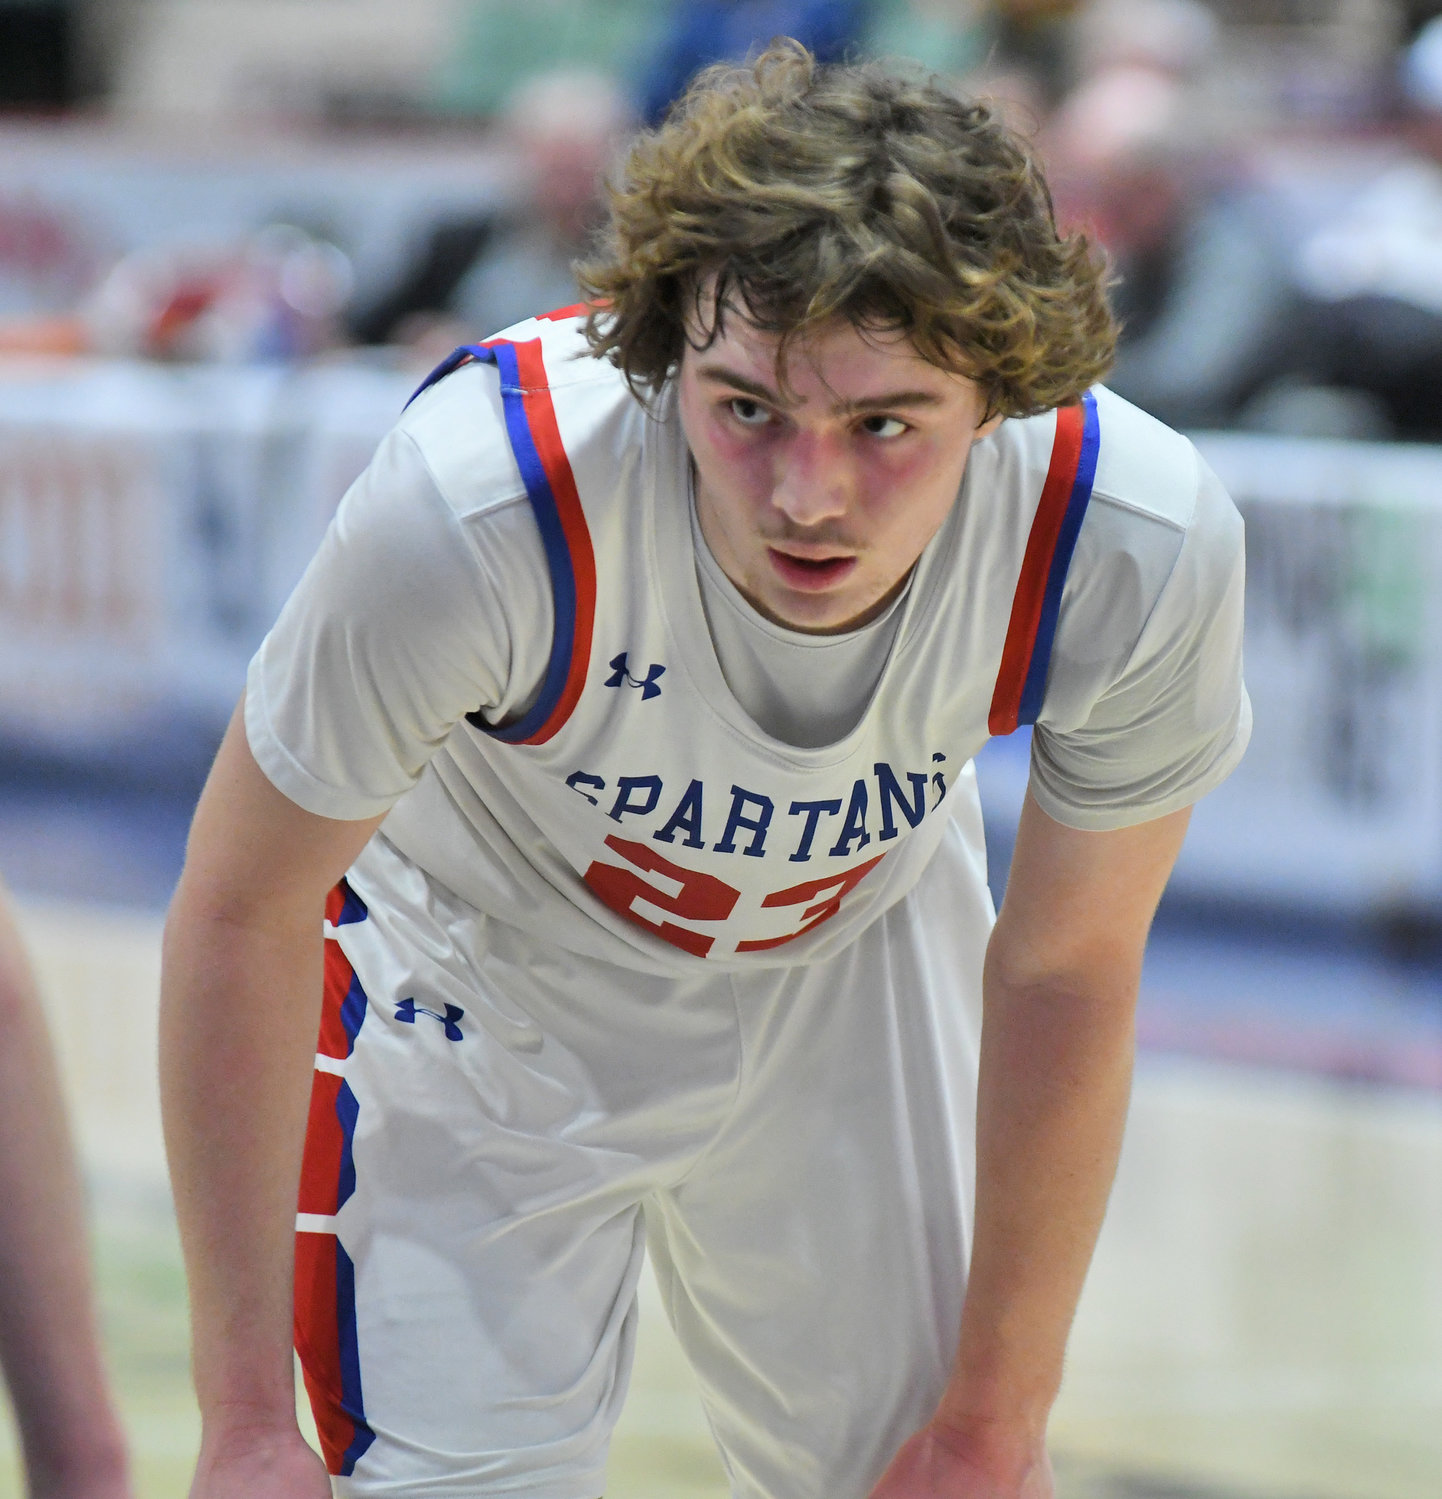 New Hartford's Zach Philipkoski helped guide the Spartans to the Class A state title game. Philipkoski, who played through injuries this season, led the team with 26.1 points per game.